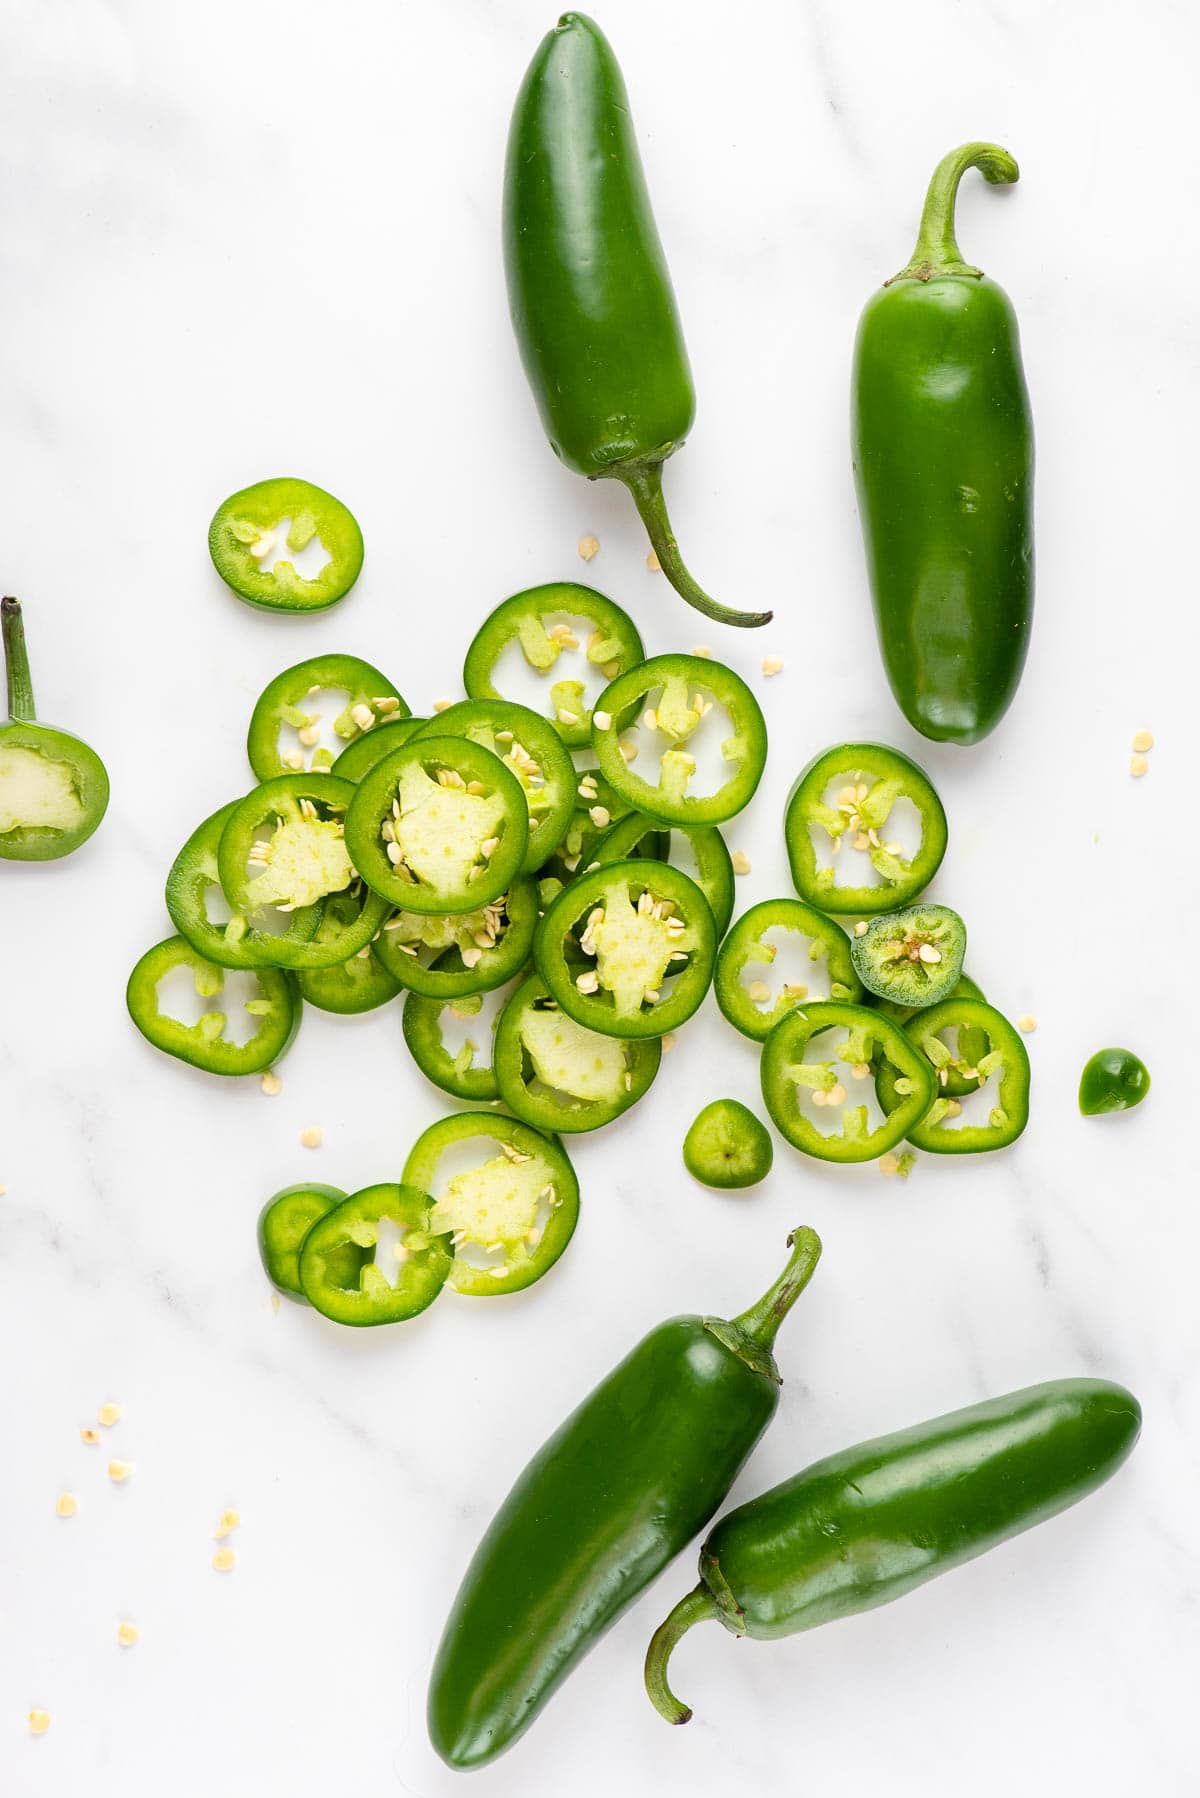 sliced jalapenos and whole jalapeno peppers